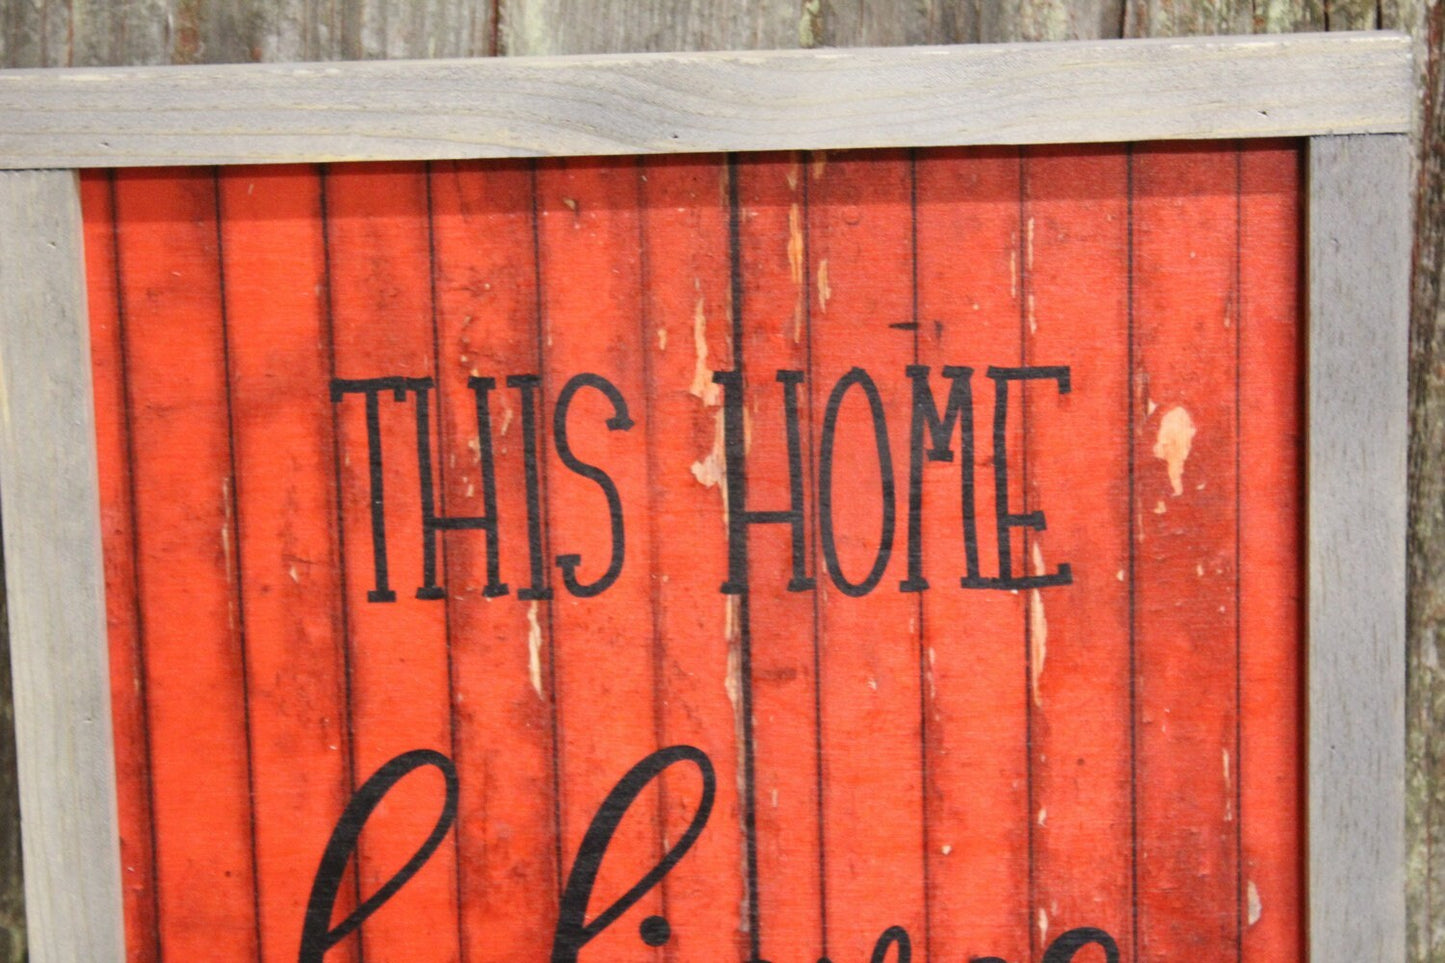 Framed This House Believes Wood Sign Santa Claus Pallet Sign Red Barn Siding Christmas Decor Print Wall Art Decoration Wall Hanging